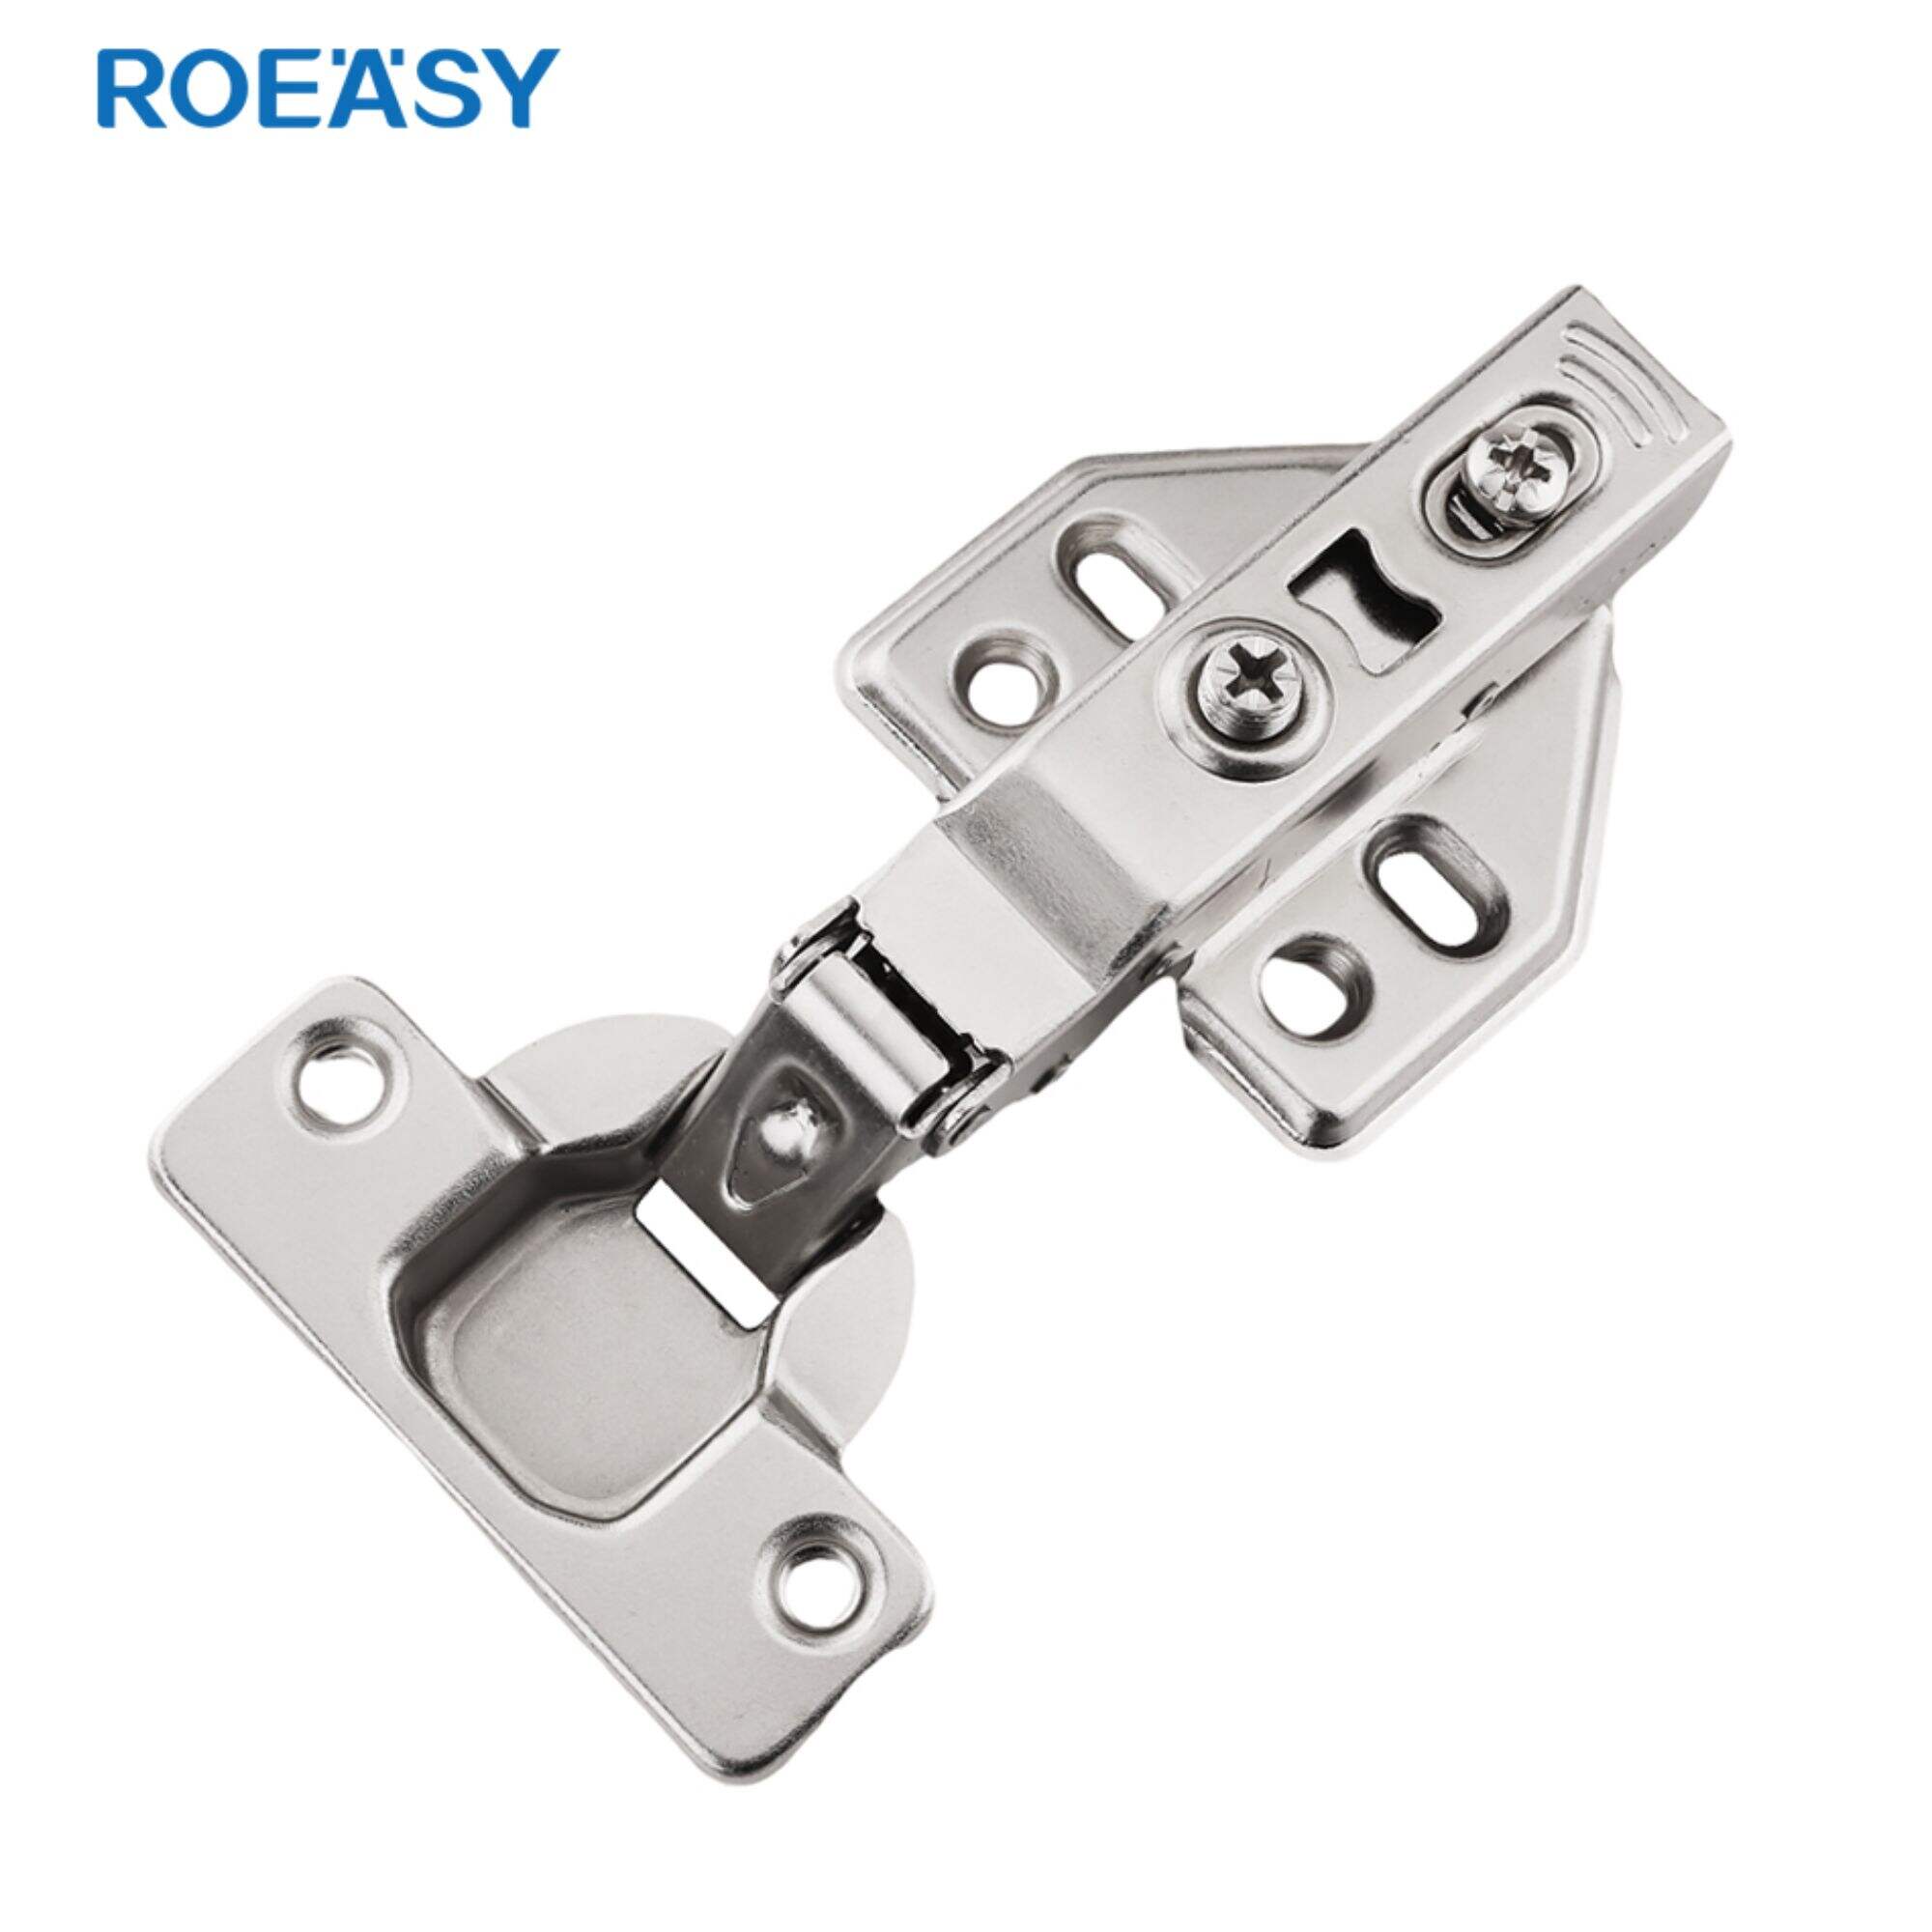 Roeasy CH-293H 35mm 105 degree cupboard hinge clip-on soft close hydraulic cabinet hinge